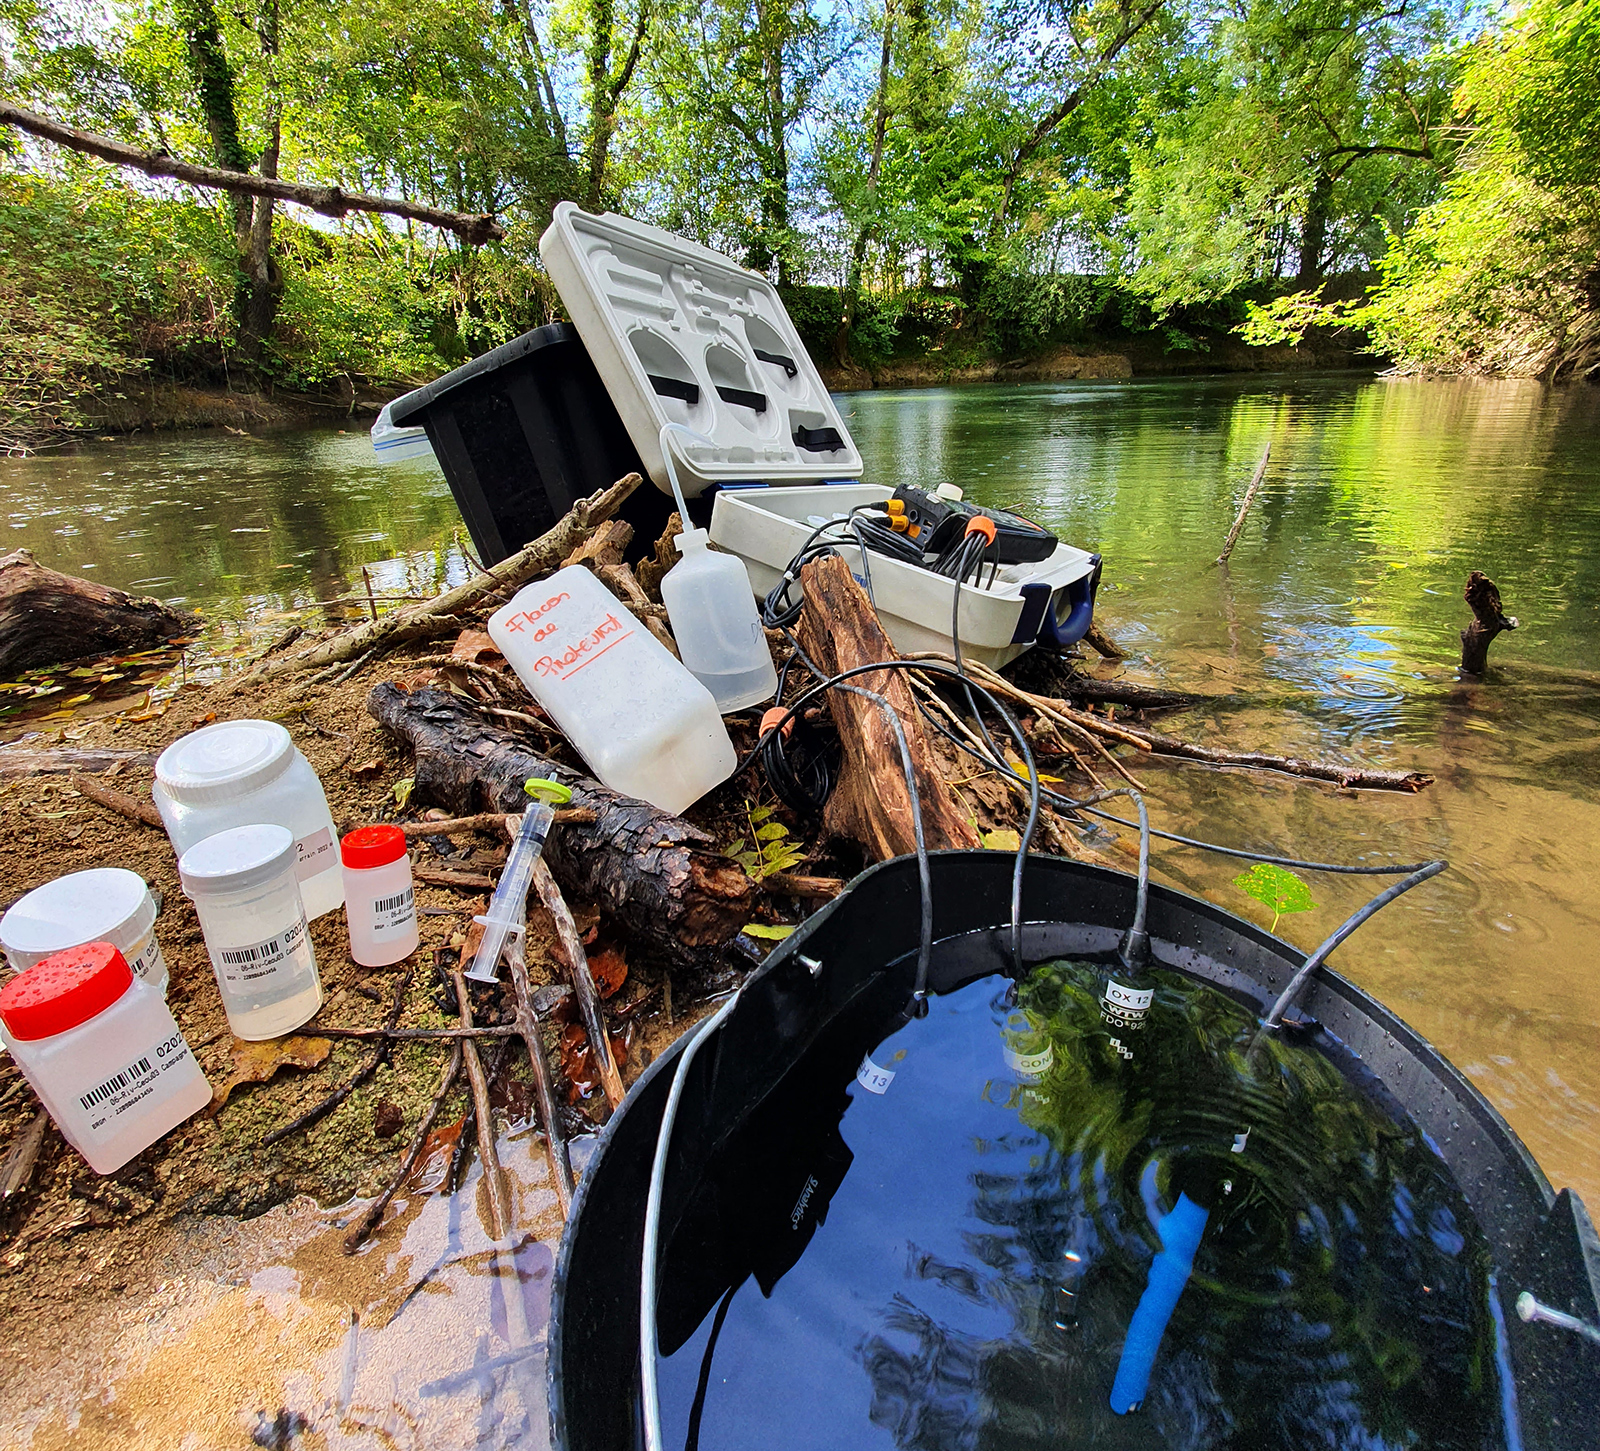 Physico-chemical monitoring and sampling of watercourses as part of the Eaux-SCARSen Dordogne project - © V. AUGER